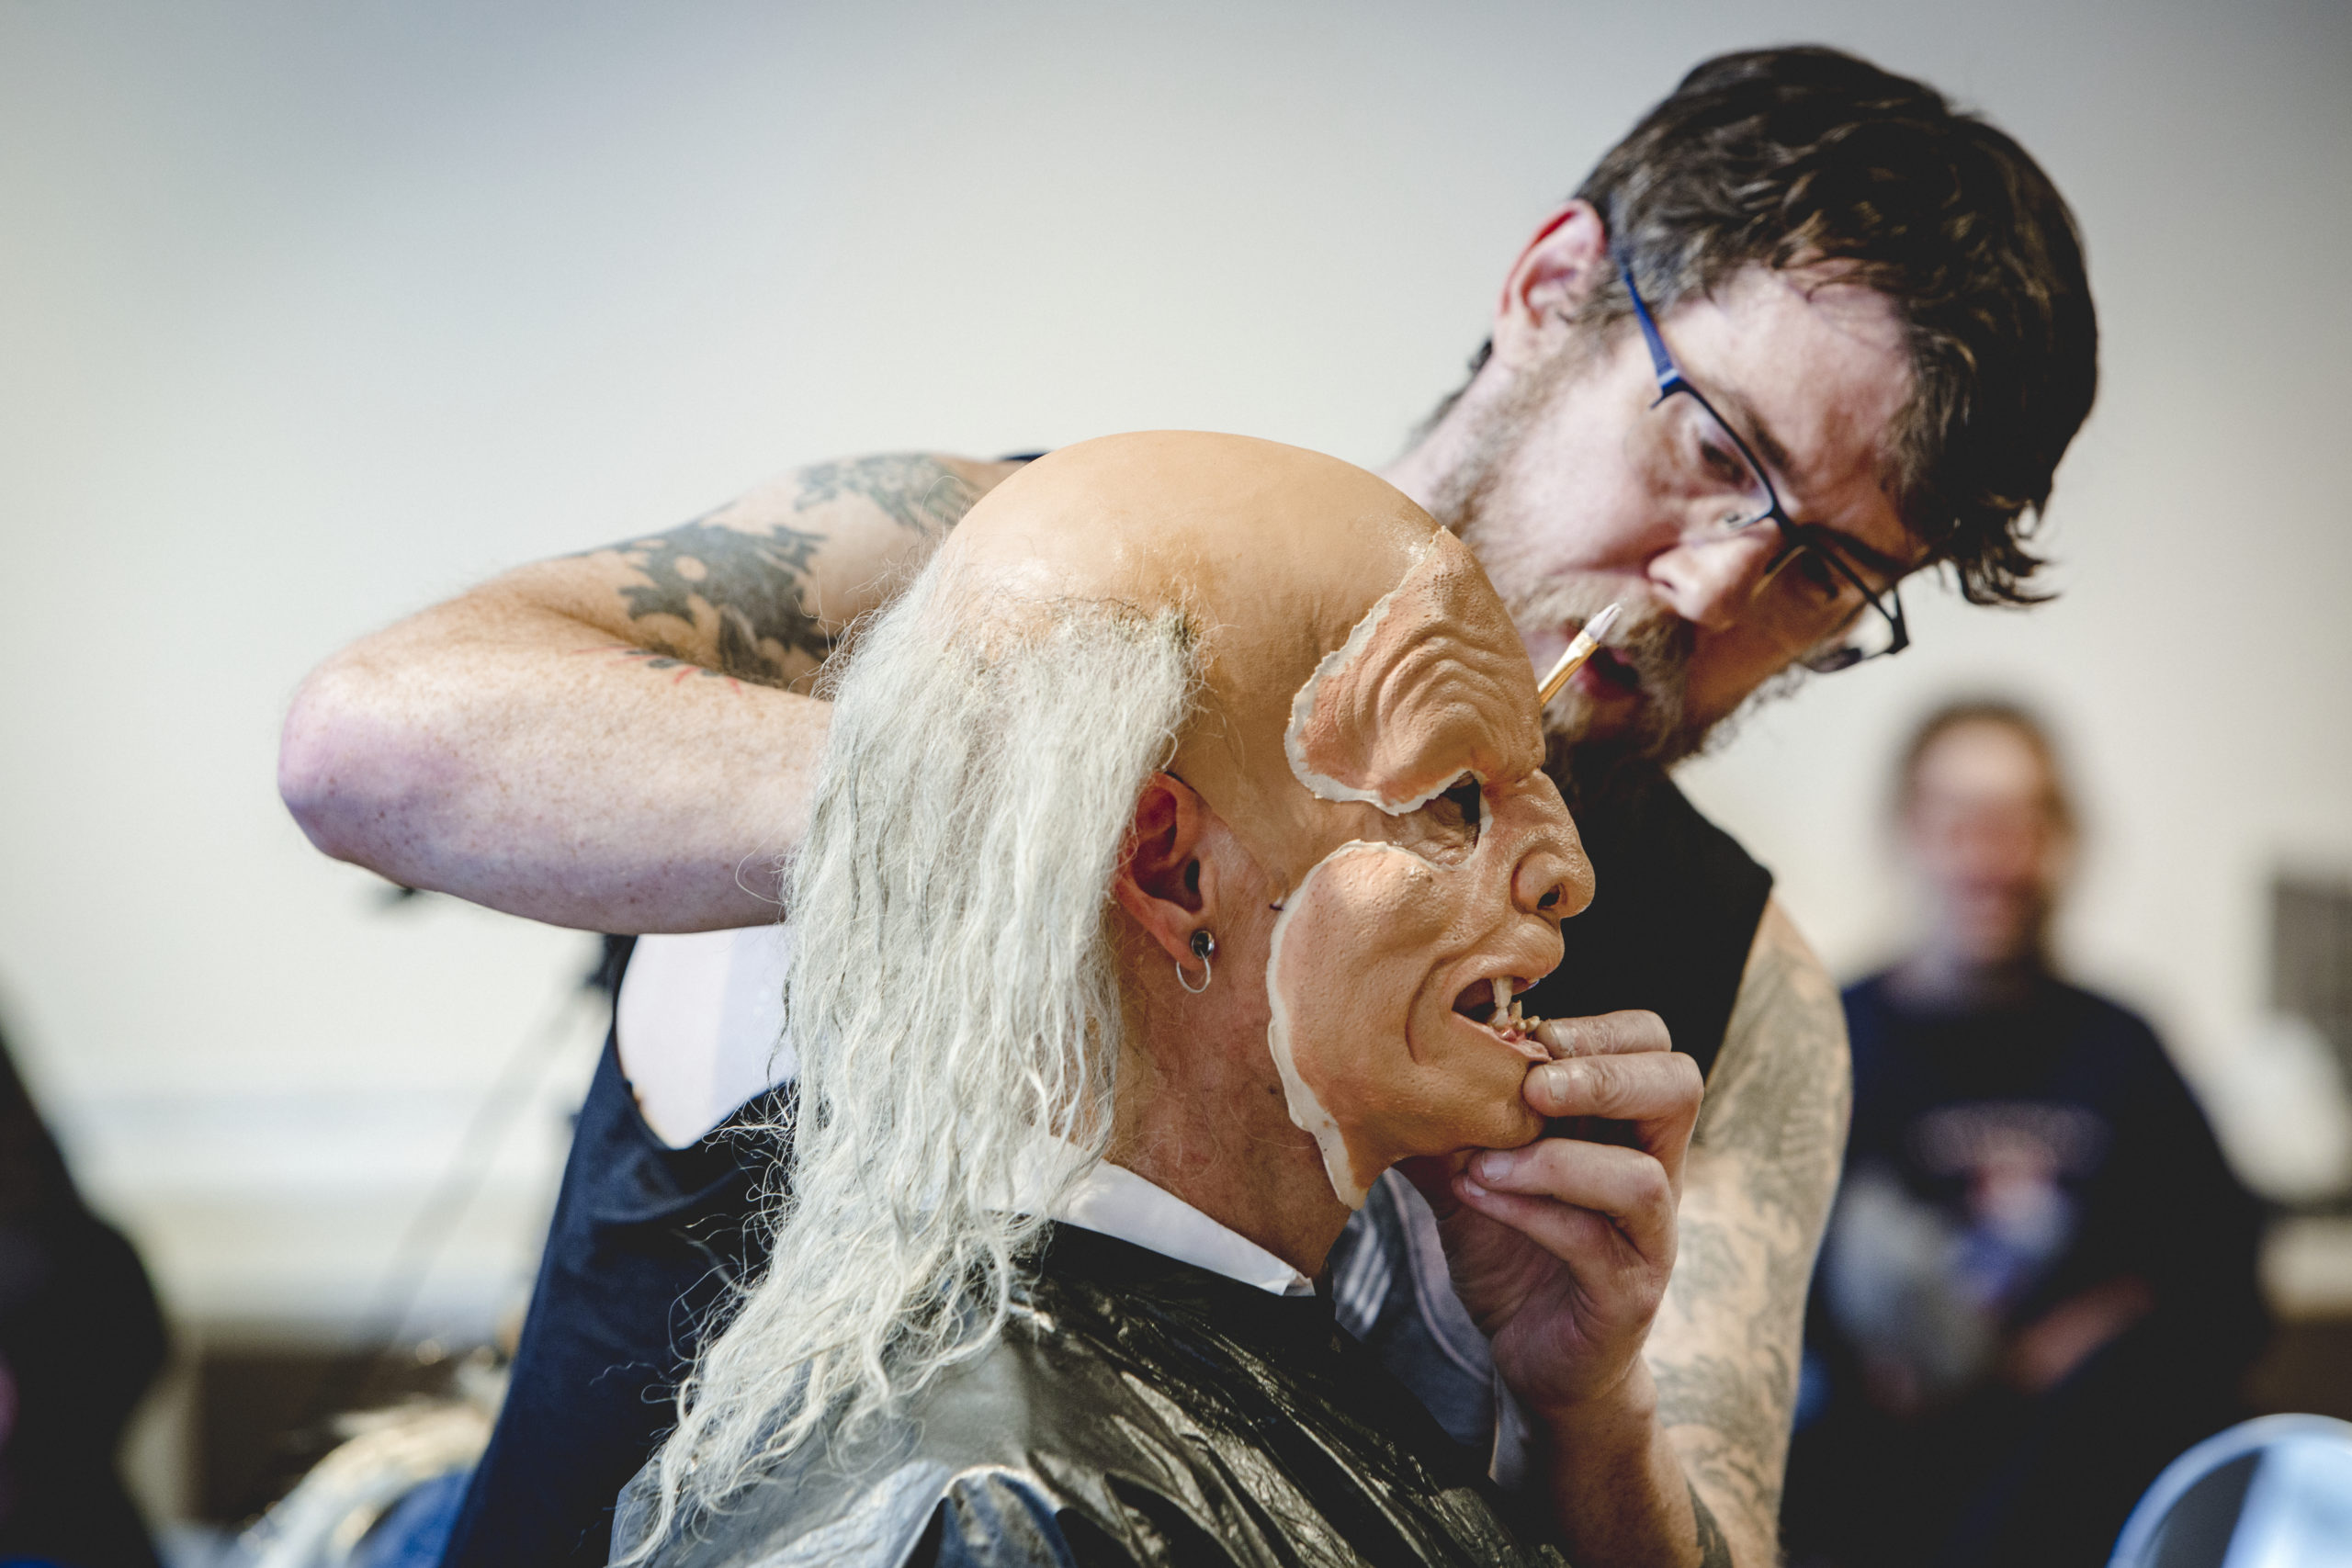 An artist working on special effects makeup on a model